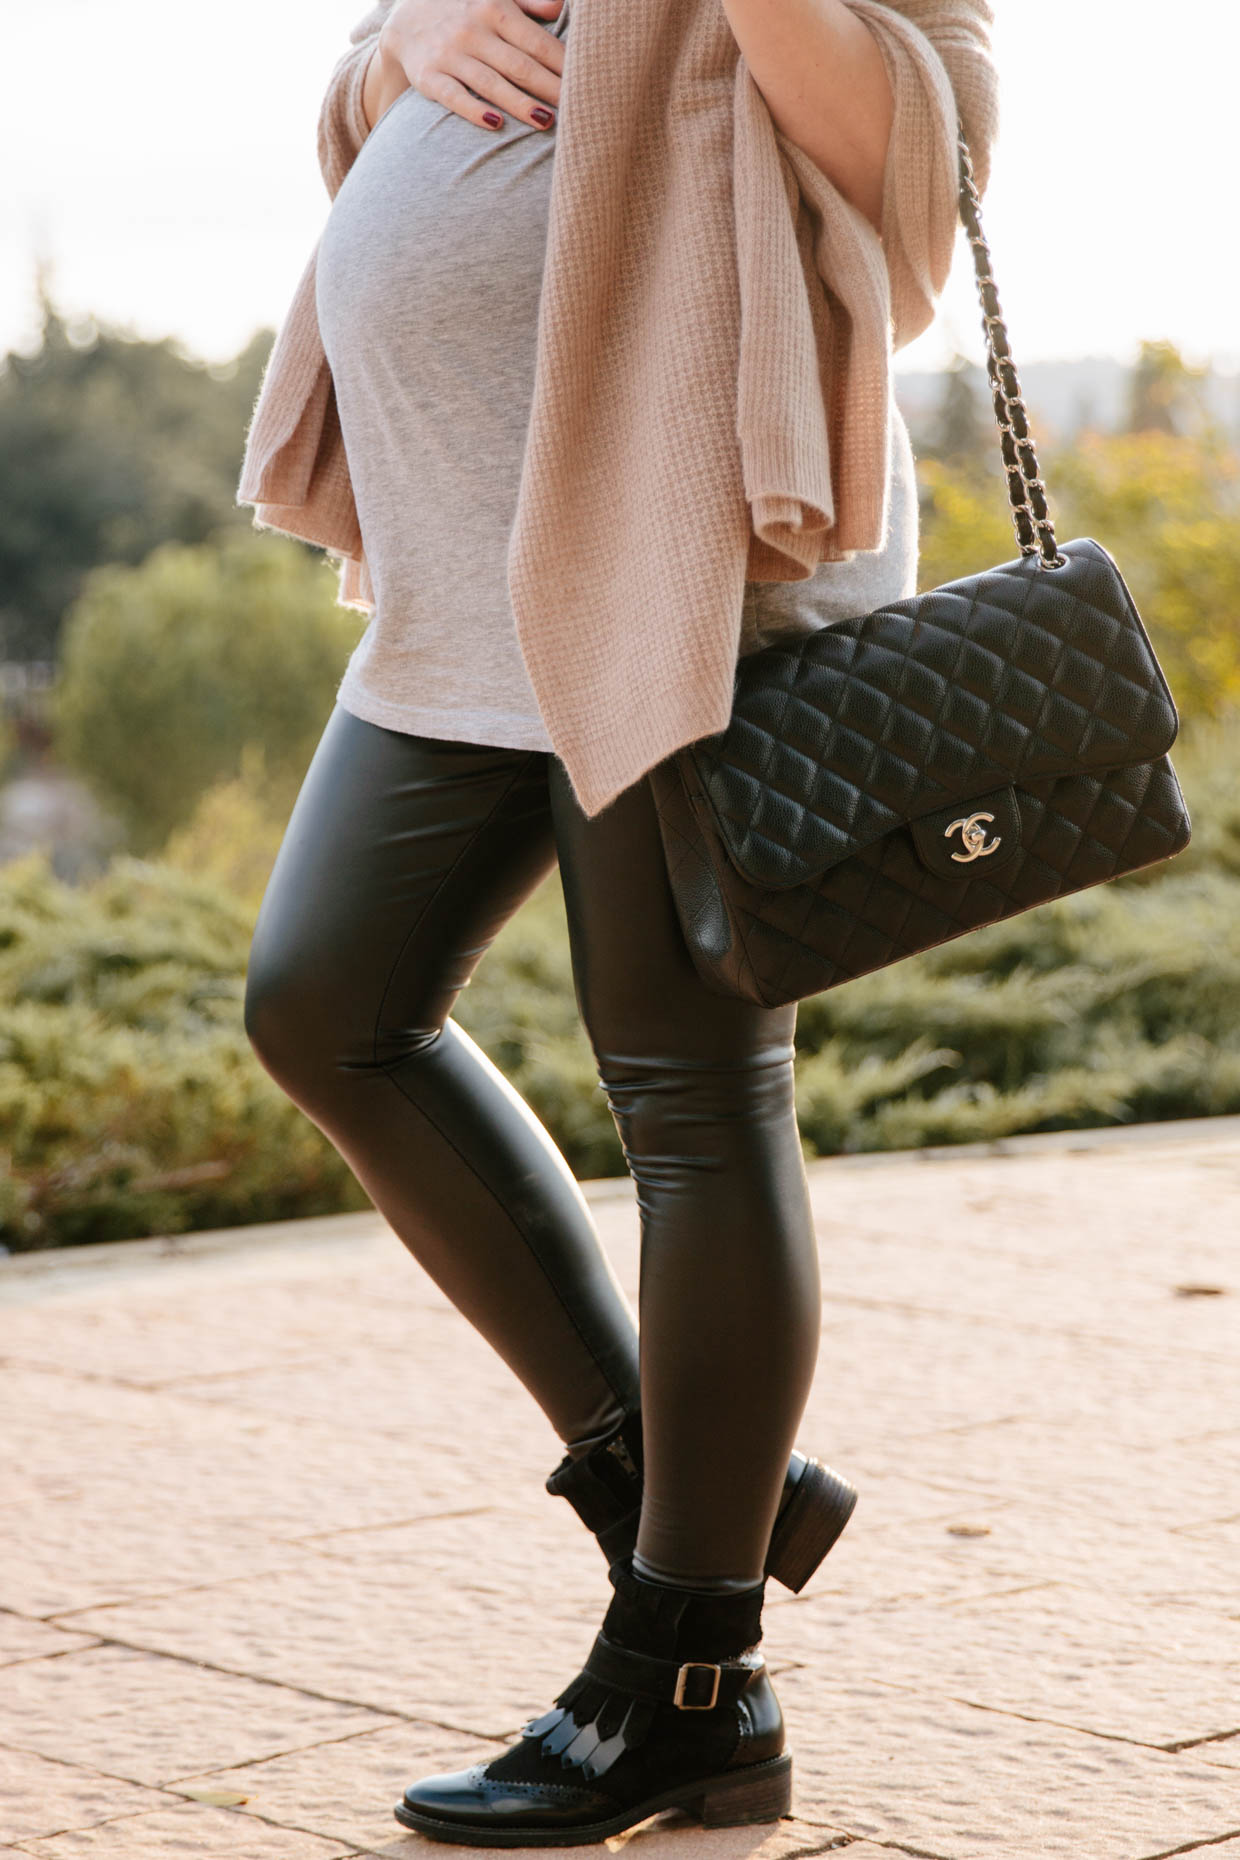 https://www.meagansmoda.com/wp-content/uploads/2017/11/The-best-leather-maternity-leggings-maternity-outfit-for-fall-with-leather-leggings-and-black-leather-ankle-boots.jpg